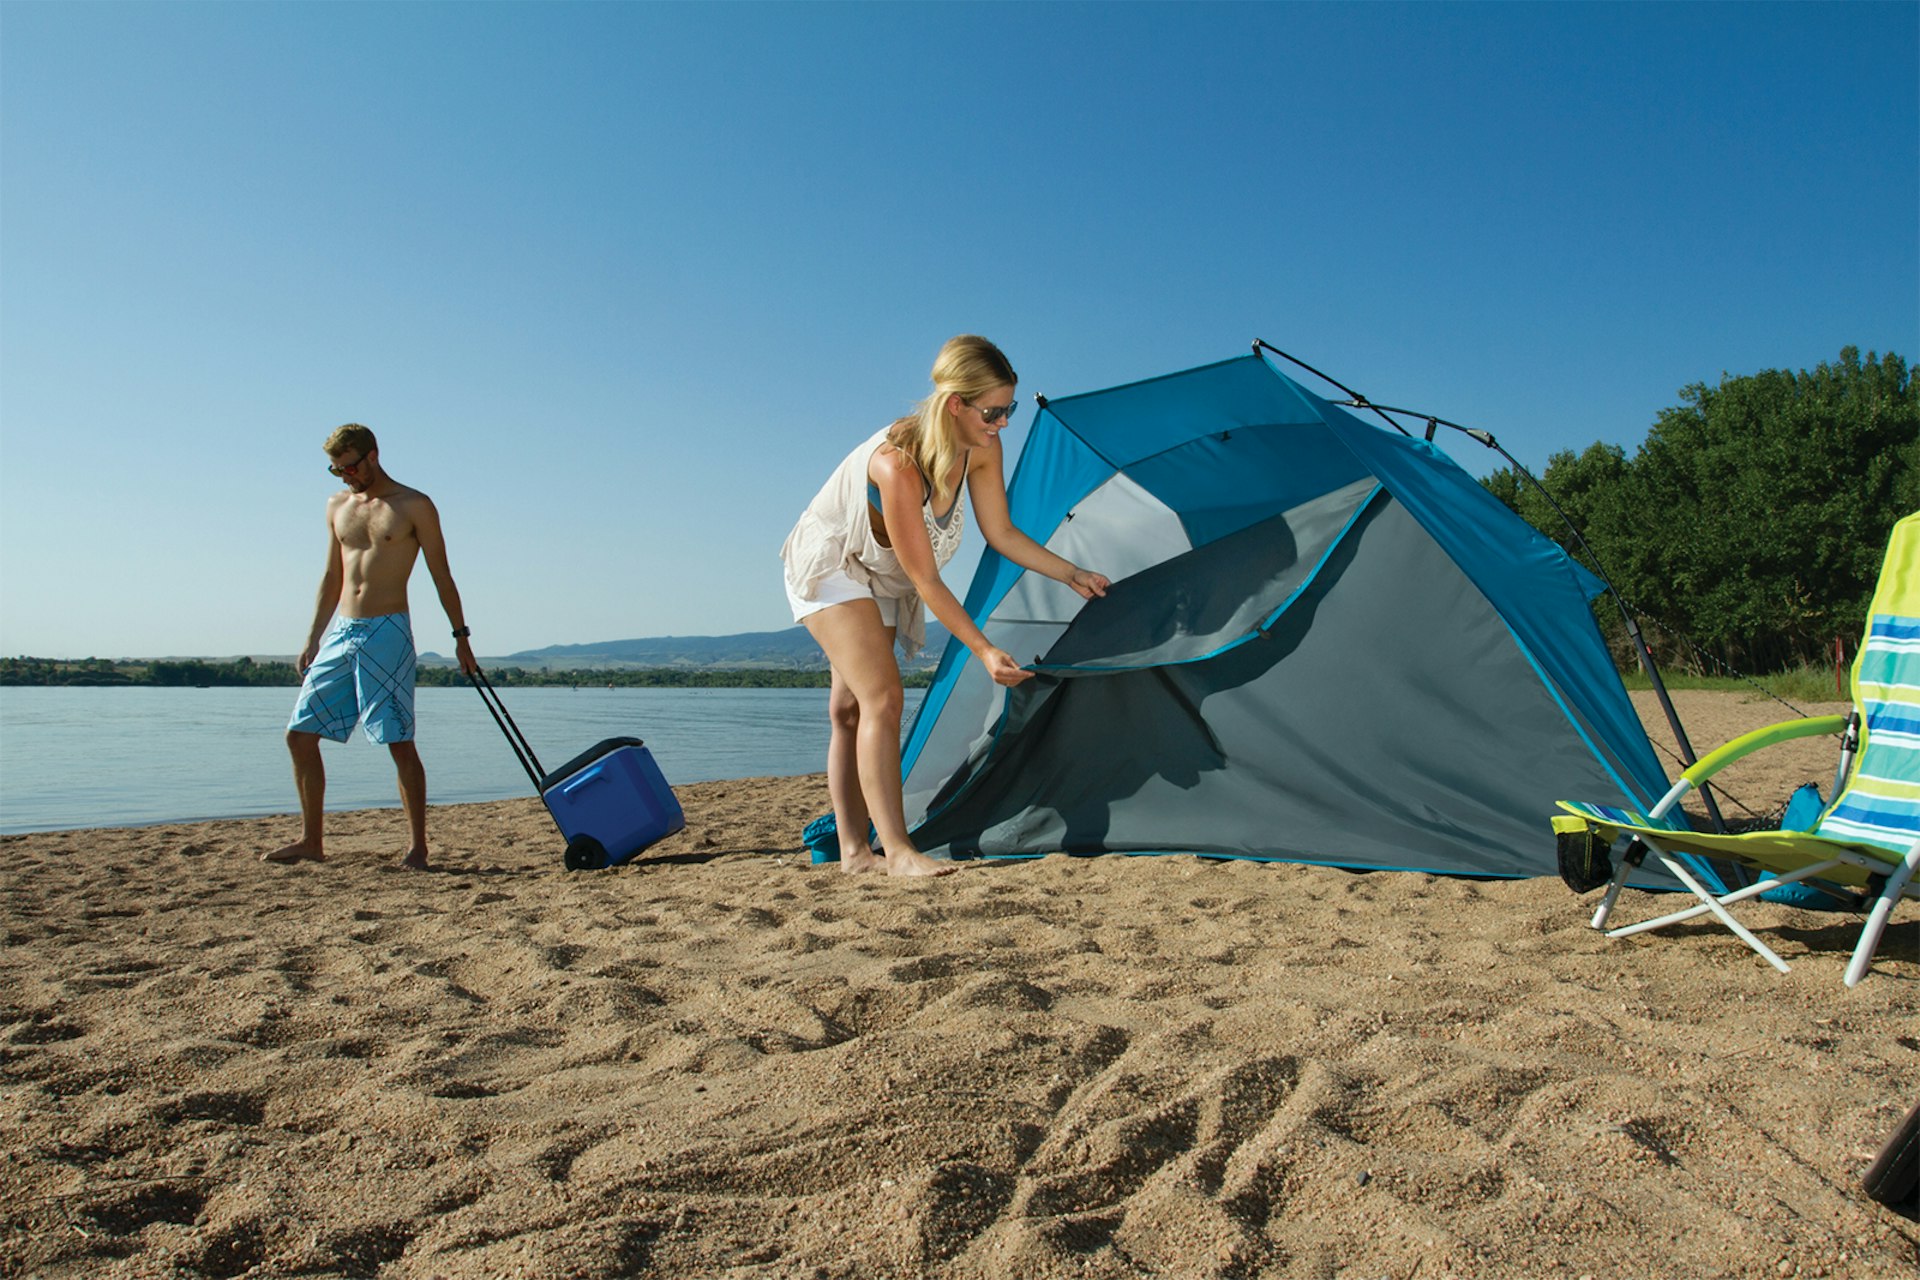 A woman erects a tent on a beach while a shirtless man stares at the ground with a cooler; beach gear